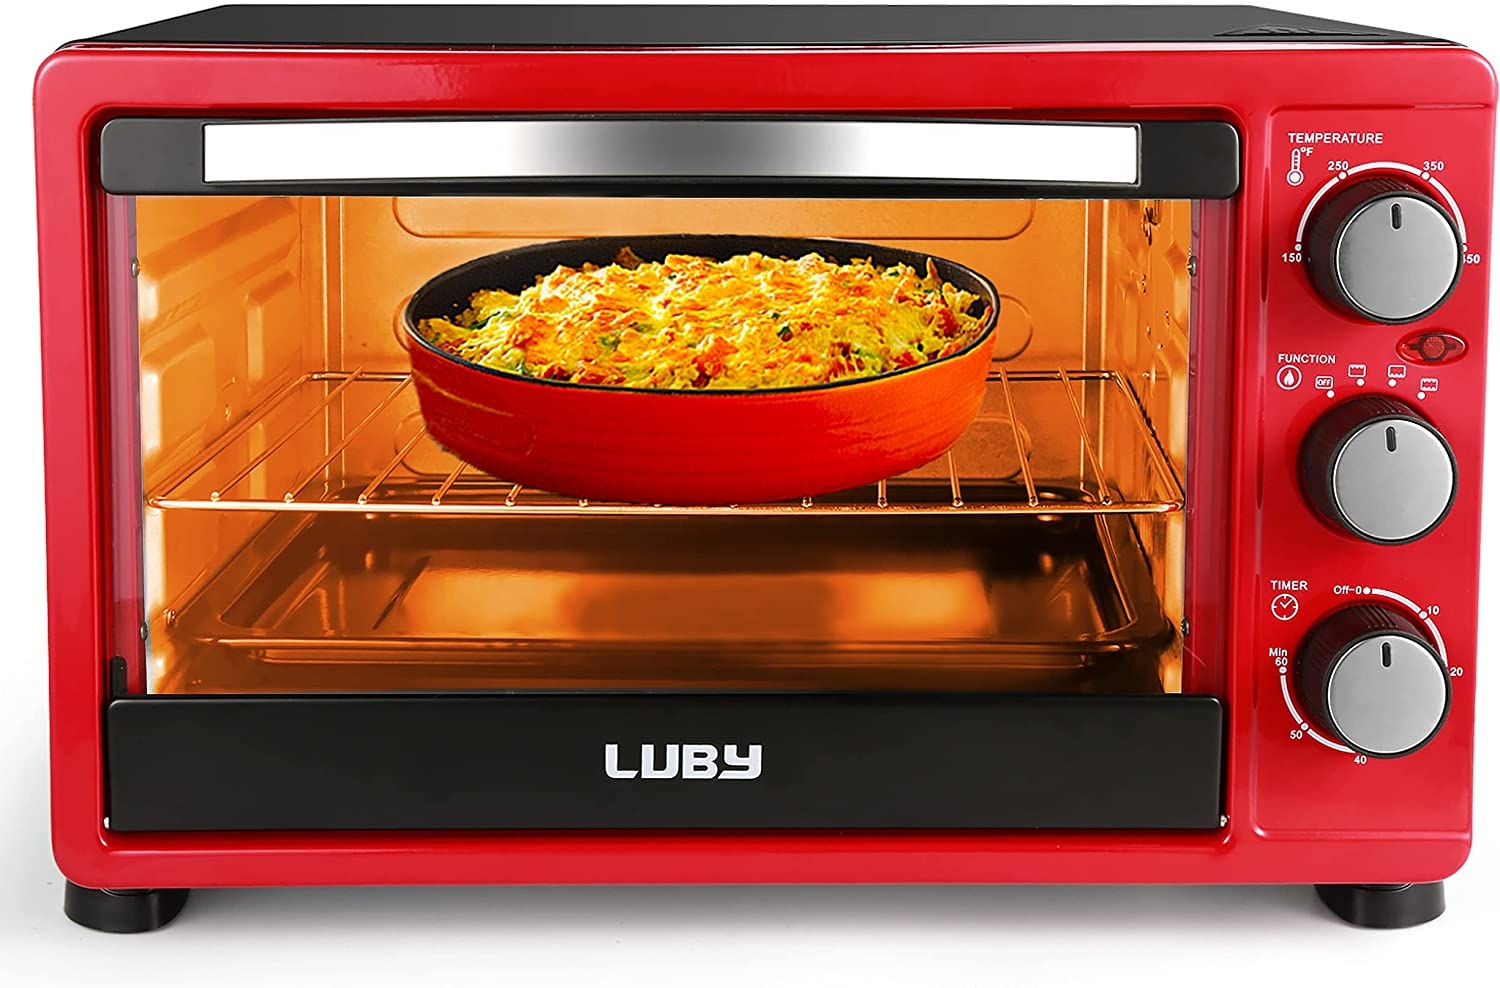 LUBY Convection Toaster Oven with Timer, Toast, Broil Settings, Includes Baking Pan, Rack and Crumb Tray, 6-Slice, Red Import To